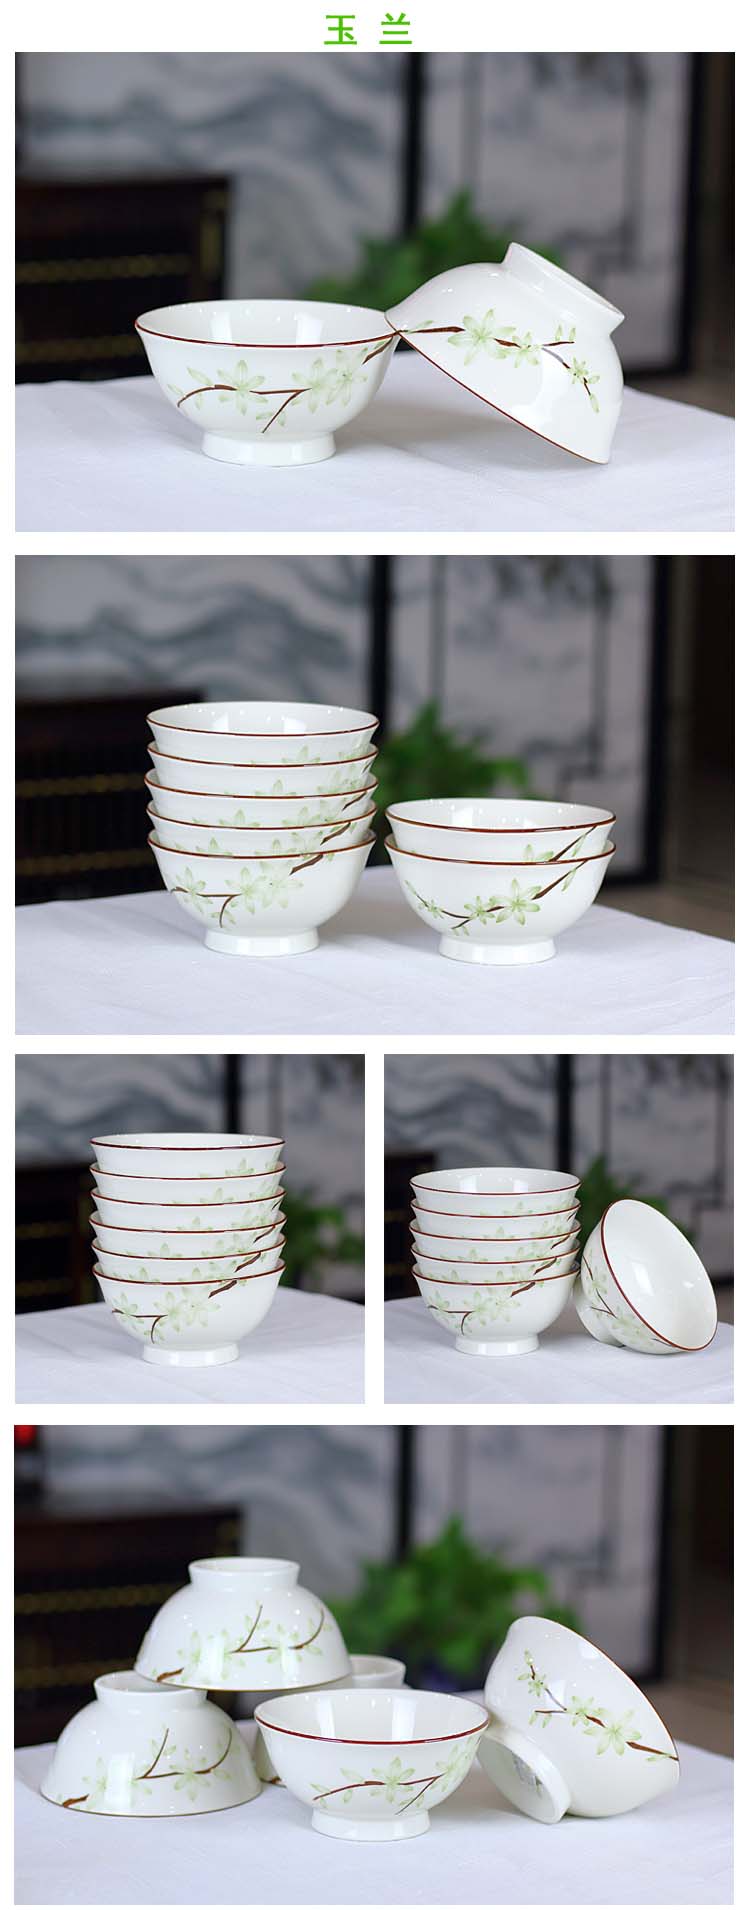 Ceramic bowl 5.5 "household eat mail Chinese high soup bowl bowl six ipads porcelain tableware rainbow such as bowl rice bowls